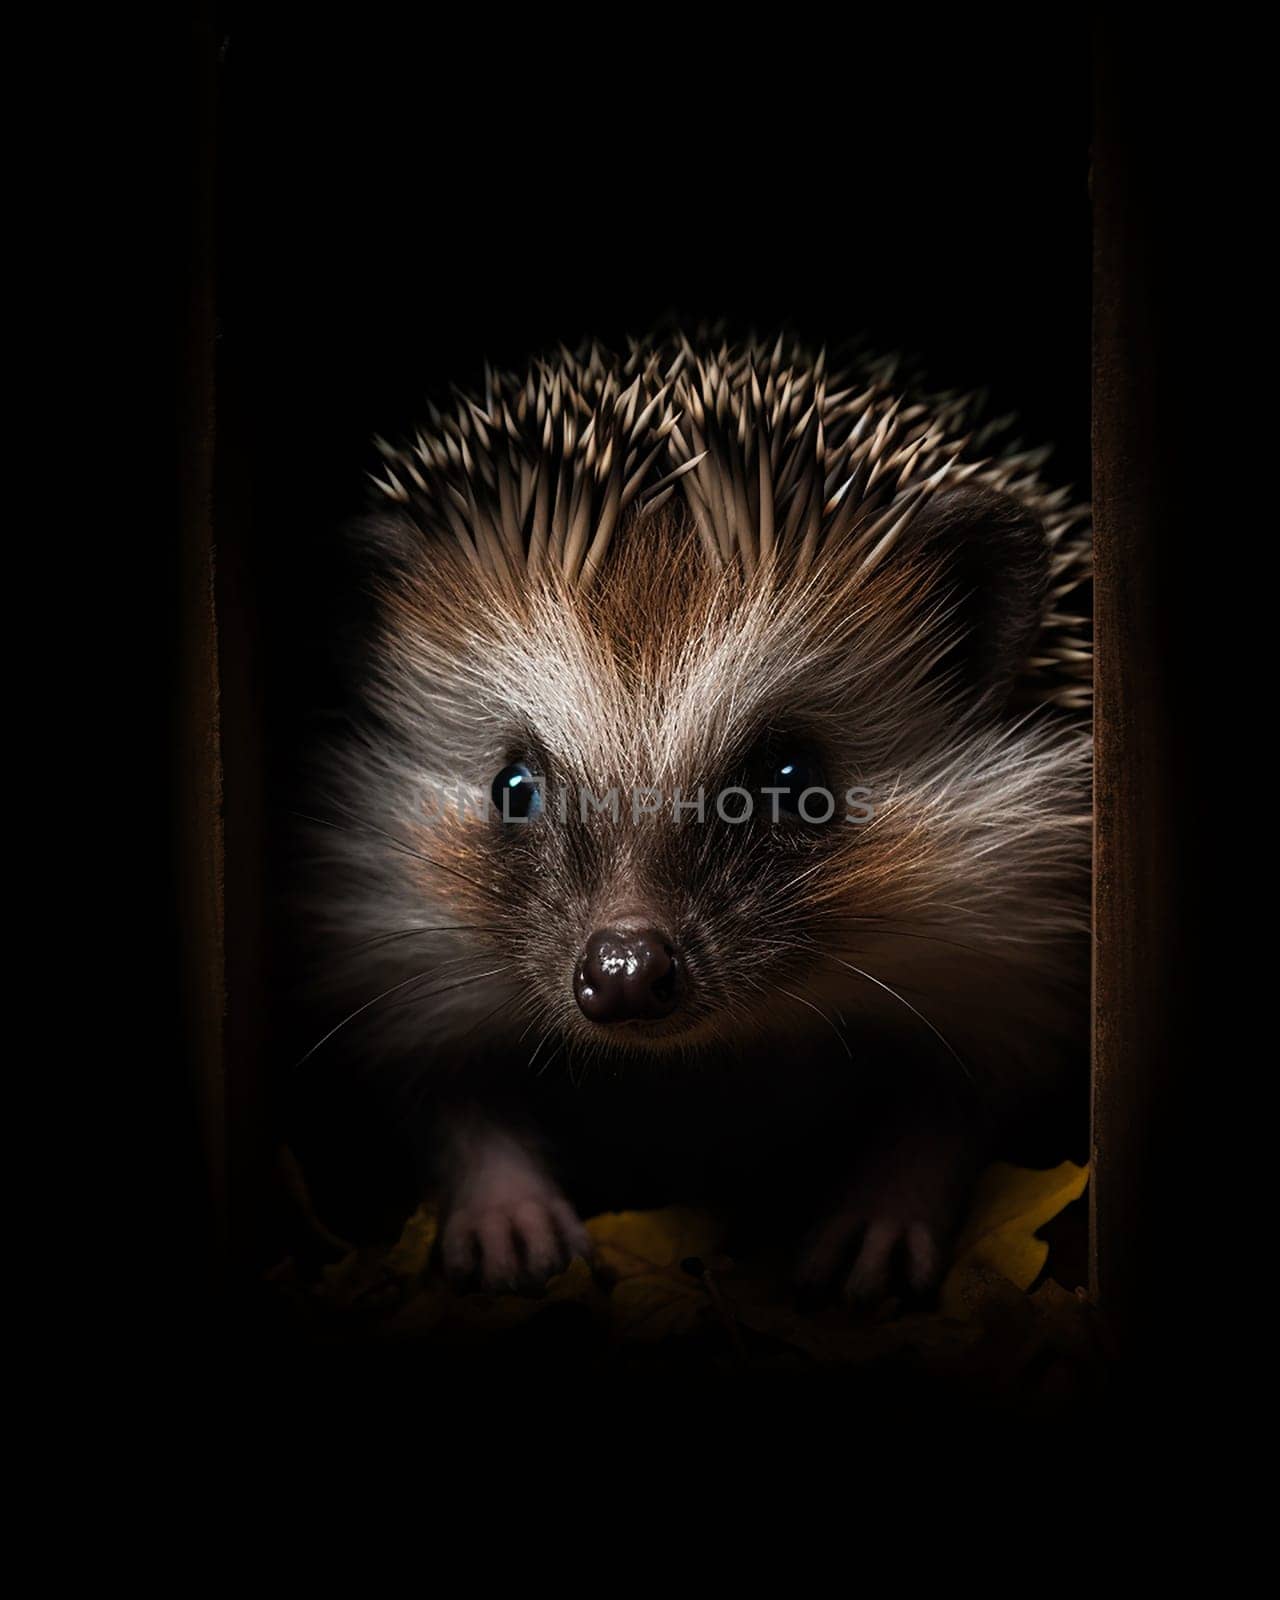 Hedgehog emerging from darkness into light